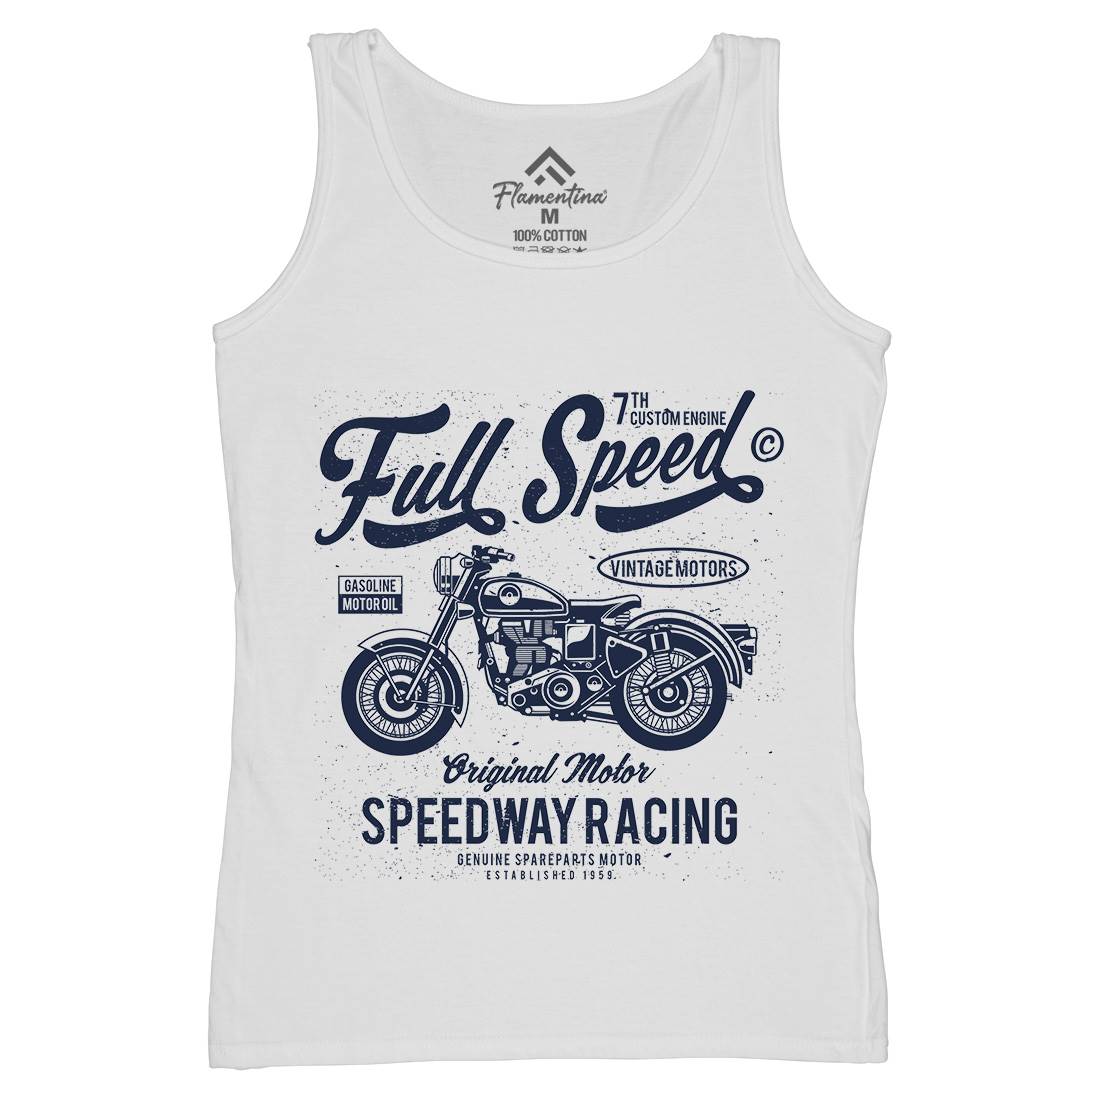 Full Speed Womens Organic Tank Top Vest Motorcycles A056